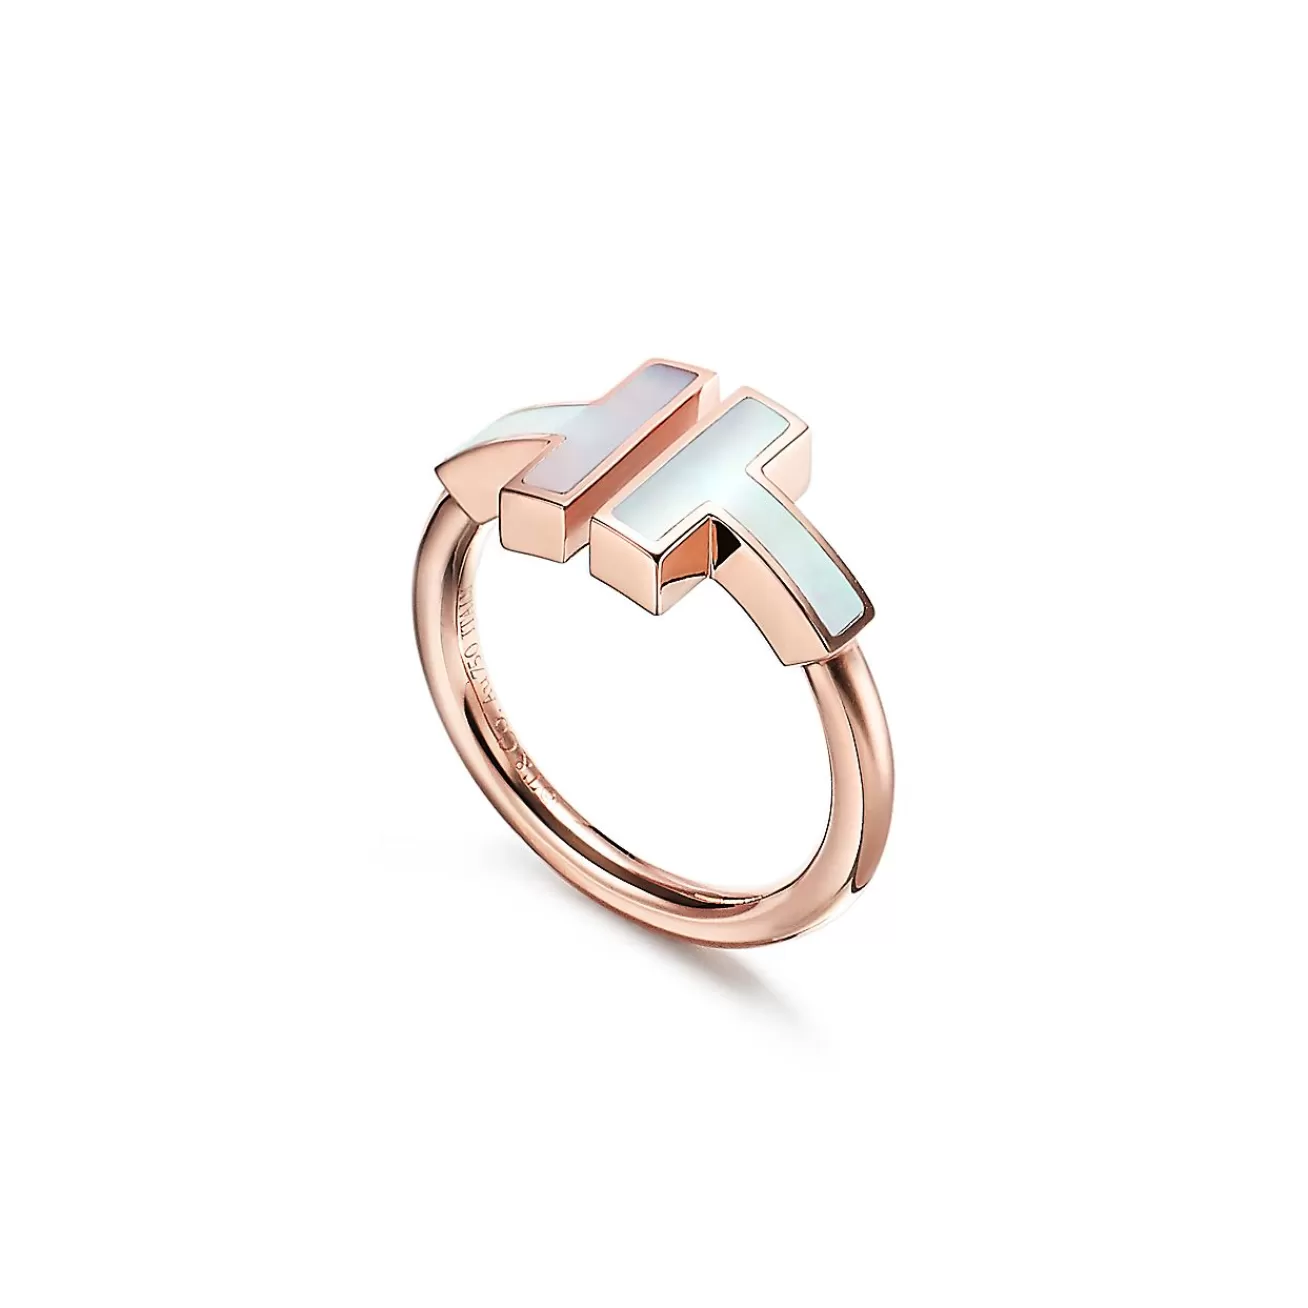 Tiffany & Co. Tiffany T Wire Ring in Rose Gold with Mother-of-pearl | ^ Rings | Rose Gold Jewelry